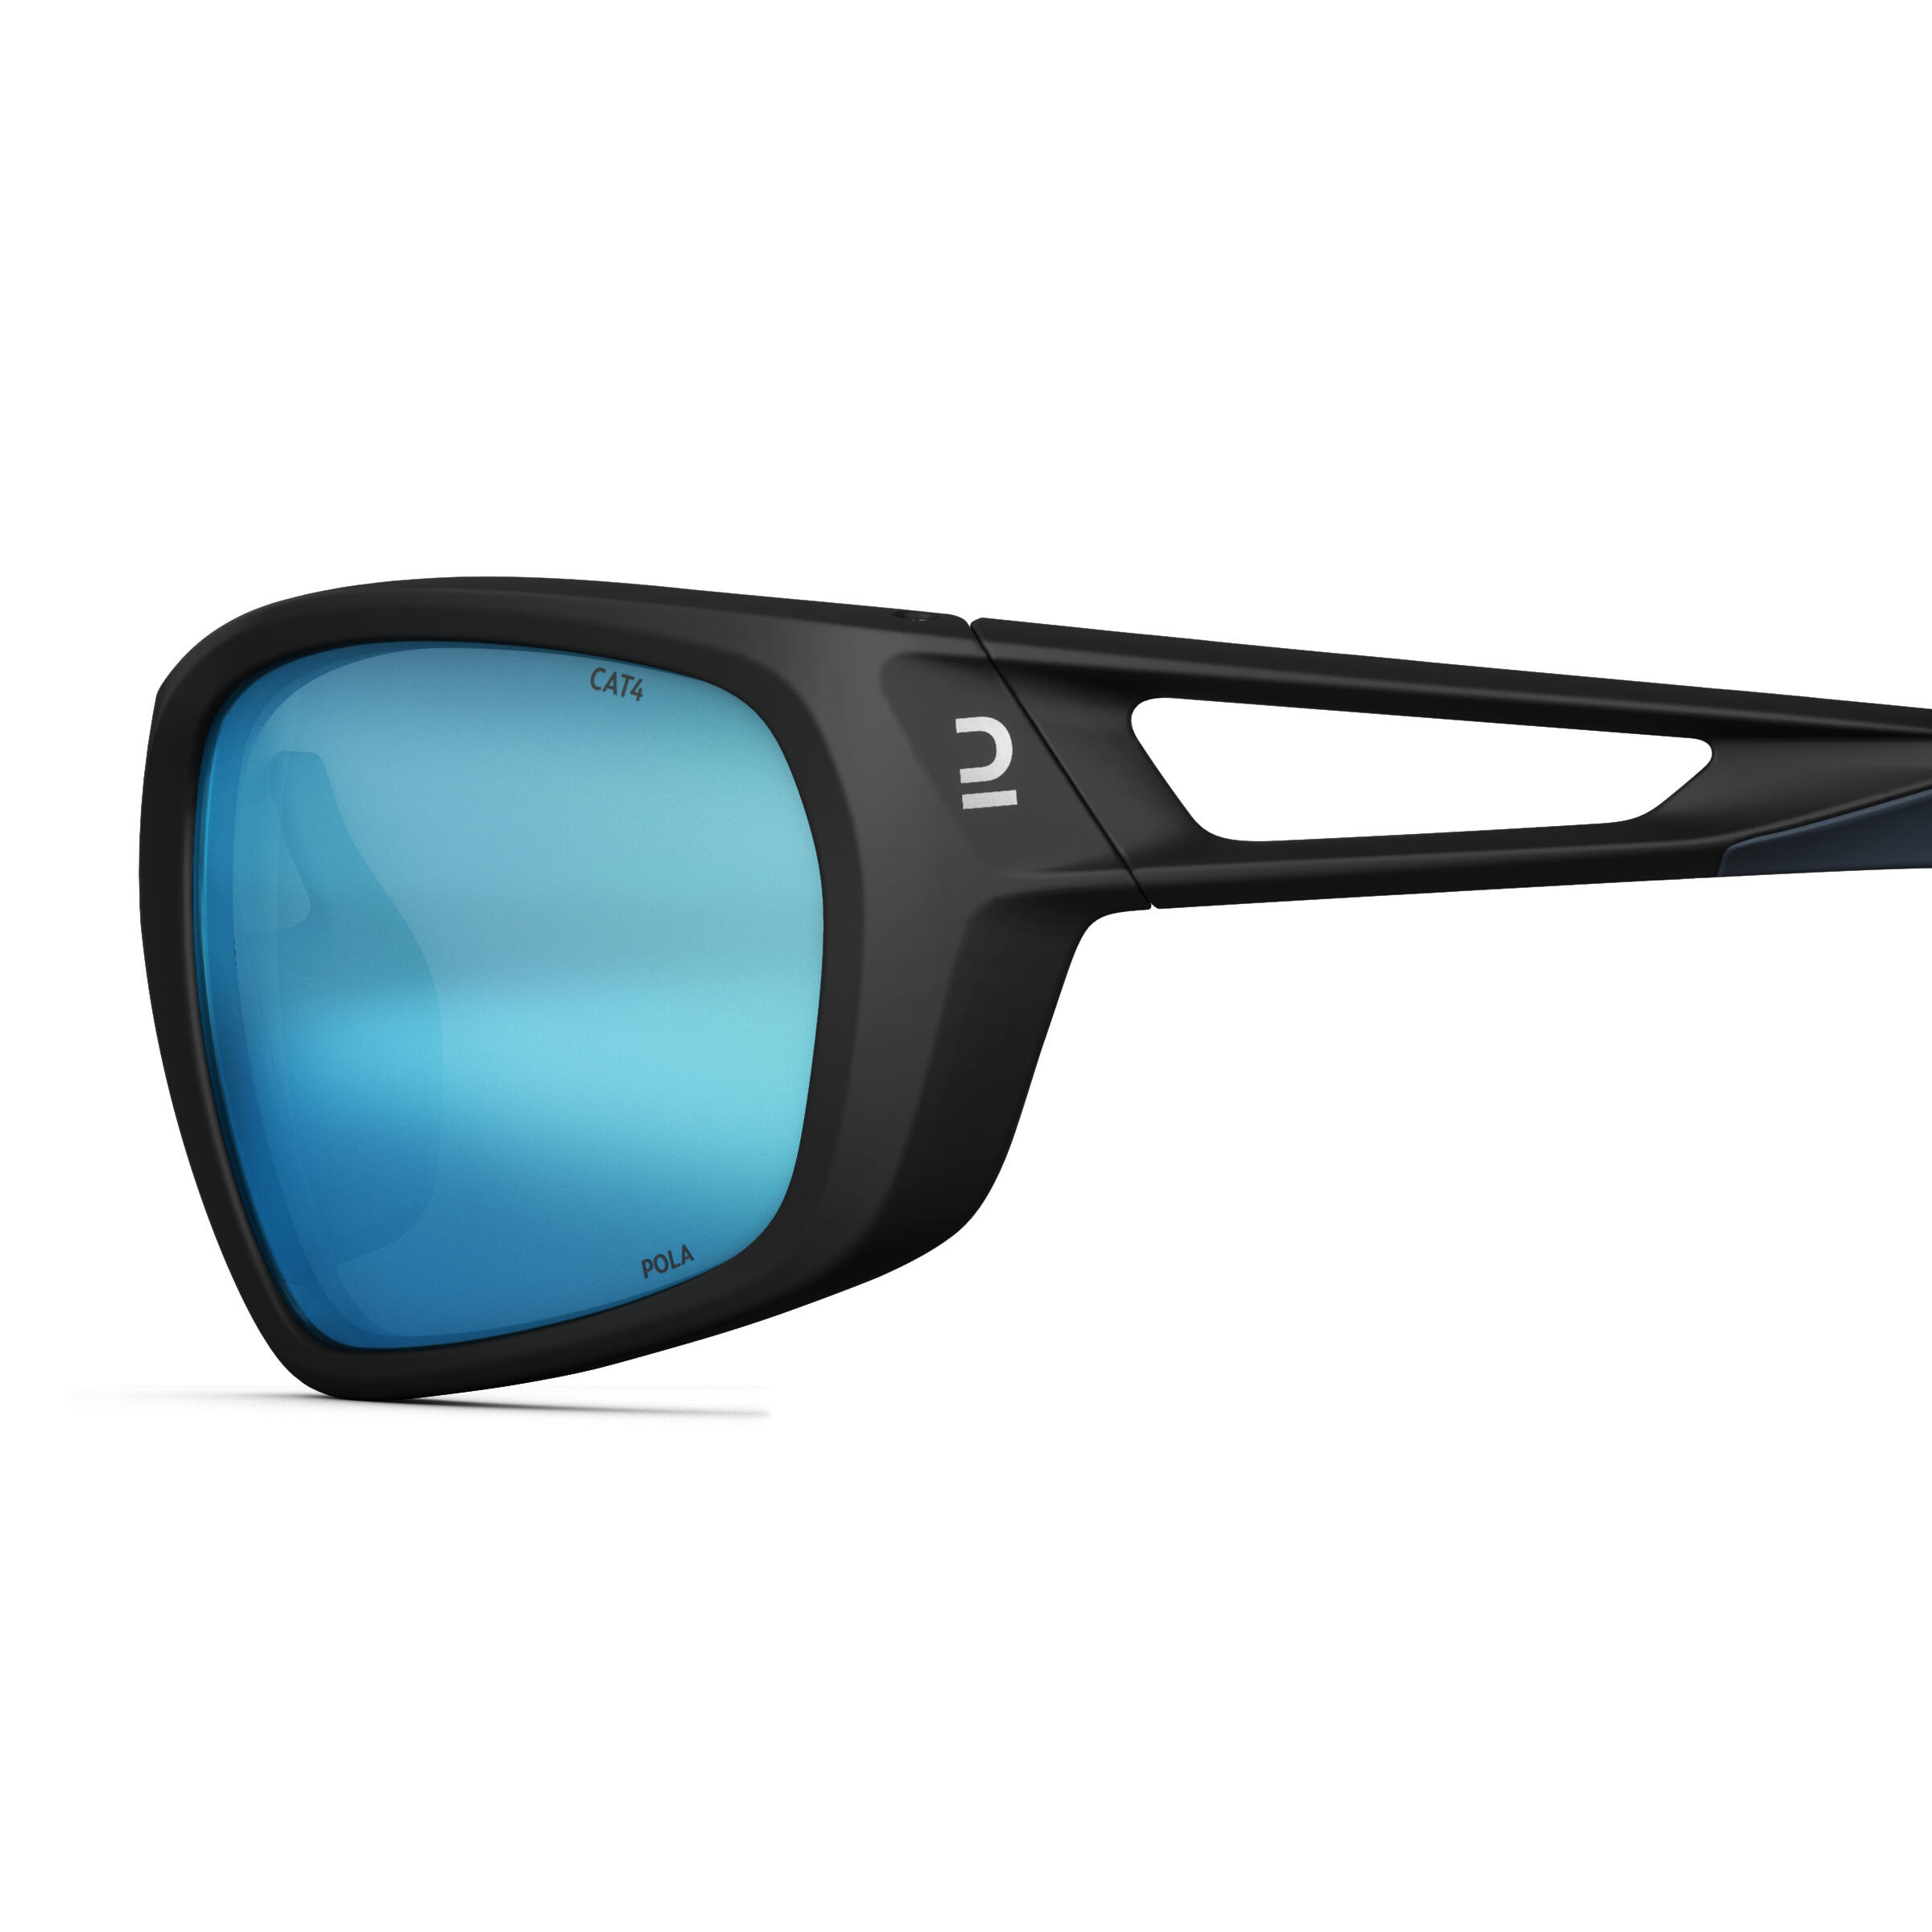 Polarized Adult Hiking Sunglasses Cat 4 MH580 Black Blue - One Size By QUECHUA | Decathlon